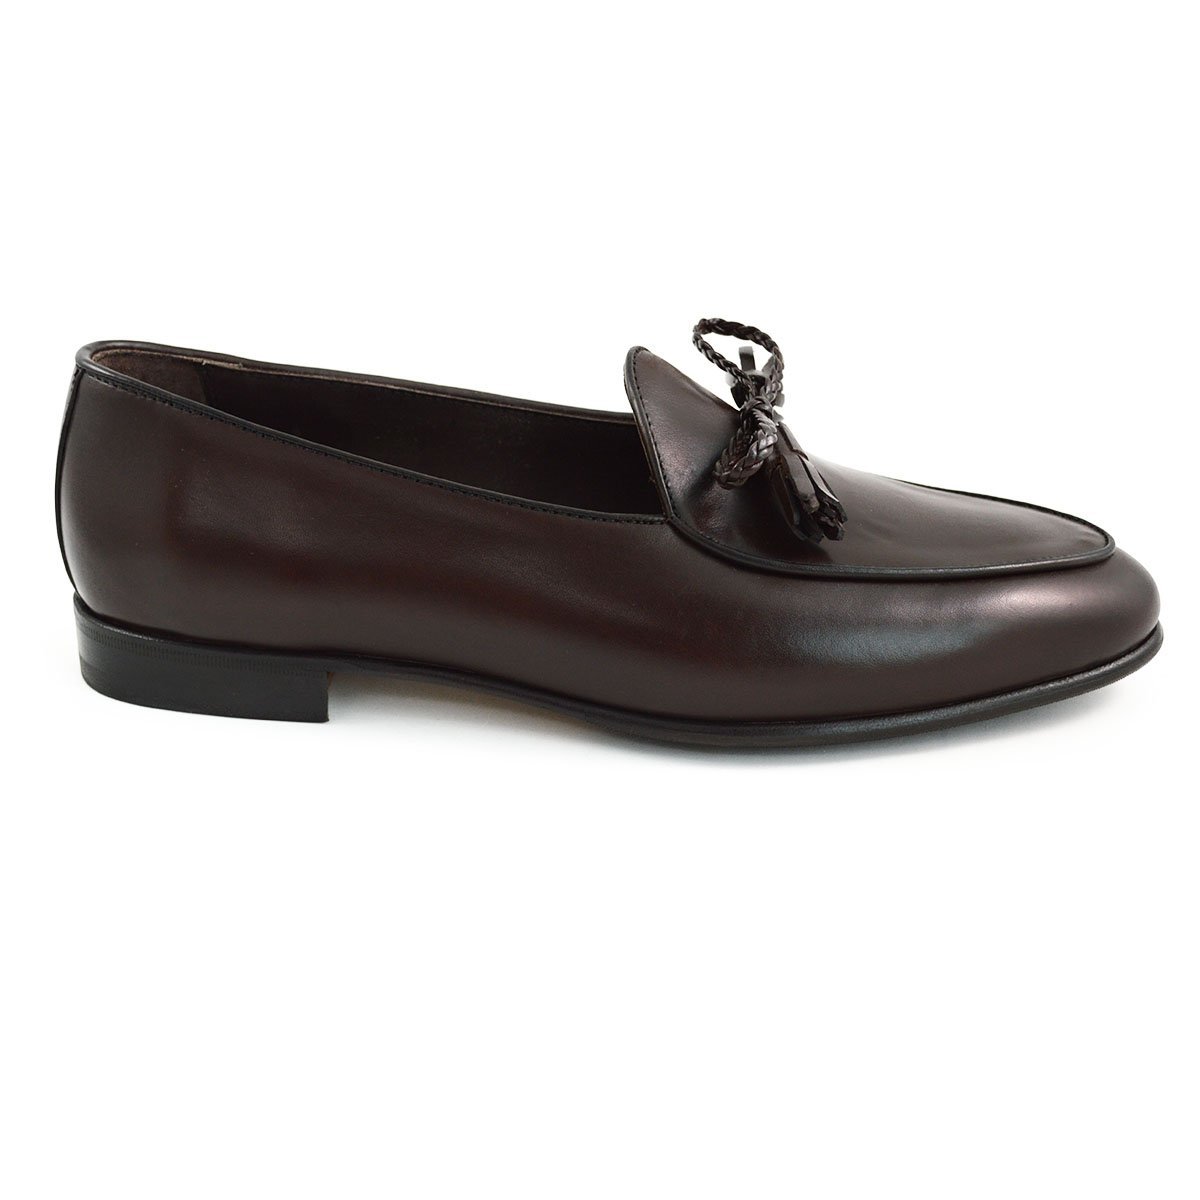 Berwick 1707 Belgian Loafer Collection - A Fine Pair of Shoes - High ...